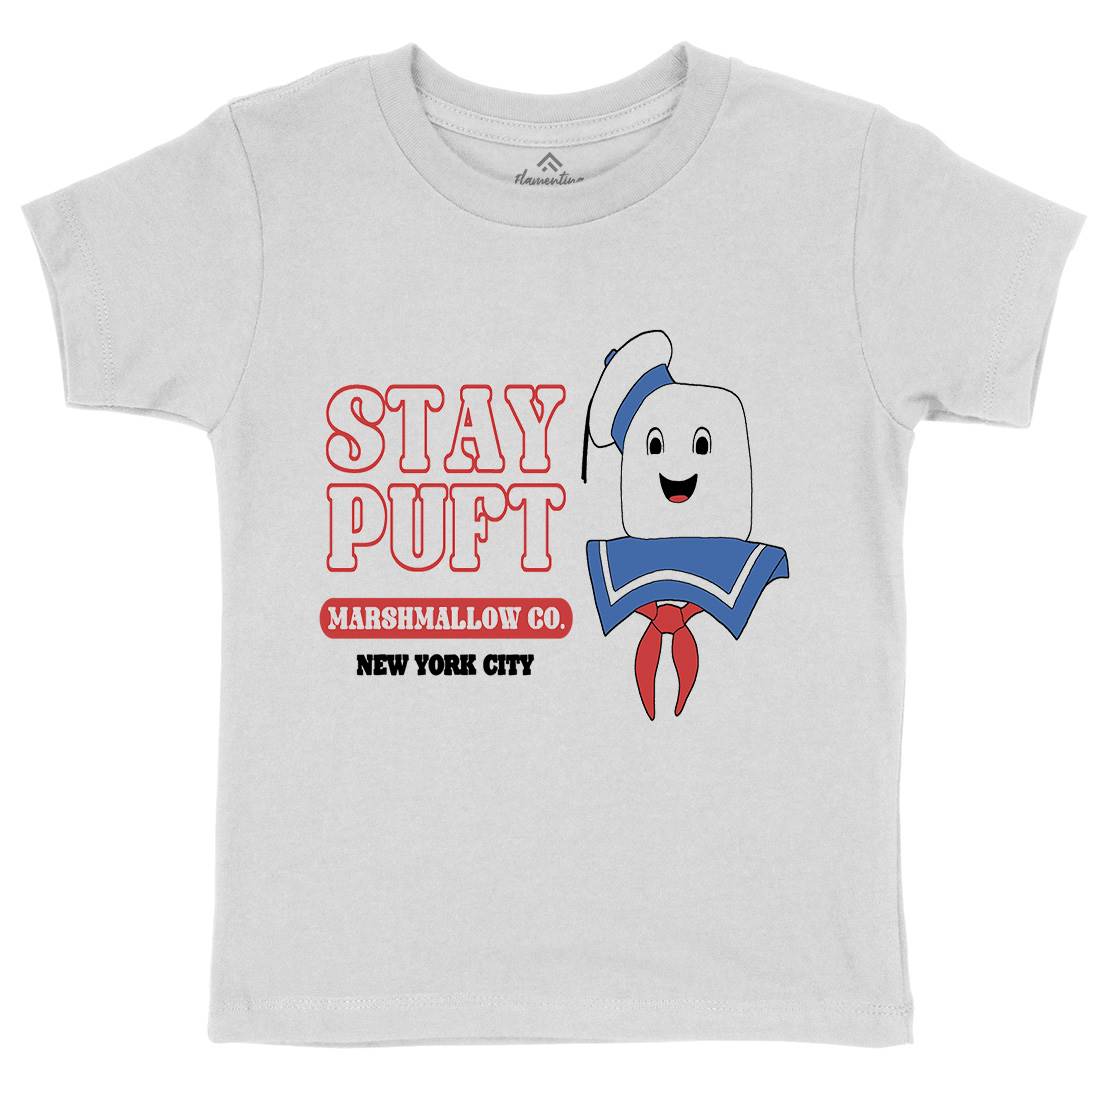 Stay Puft Co Kids Organic Crew Neck T-Shirt Space D141